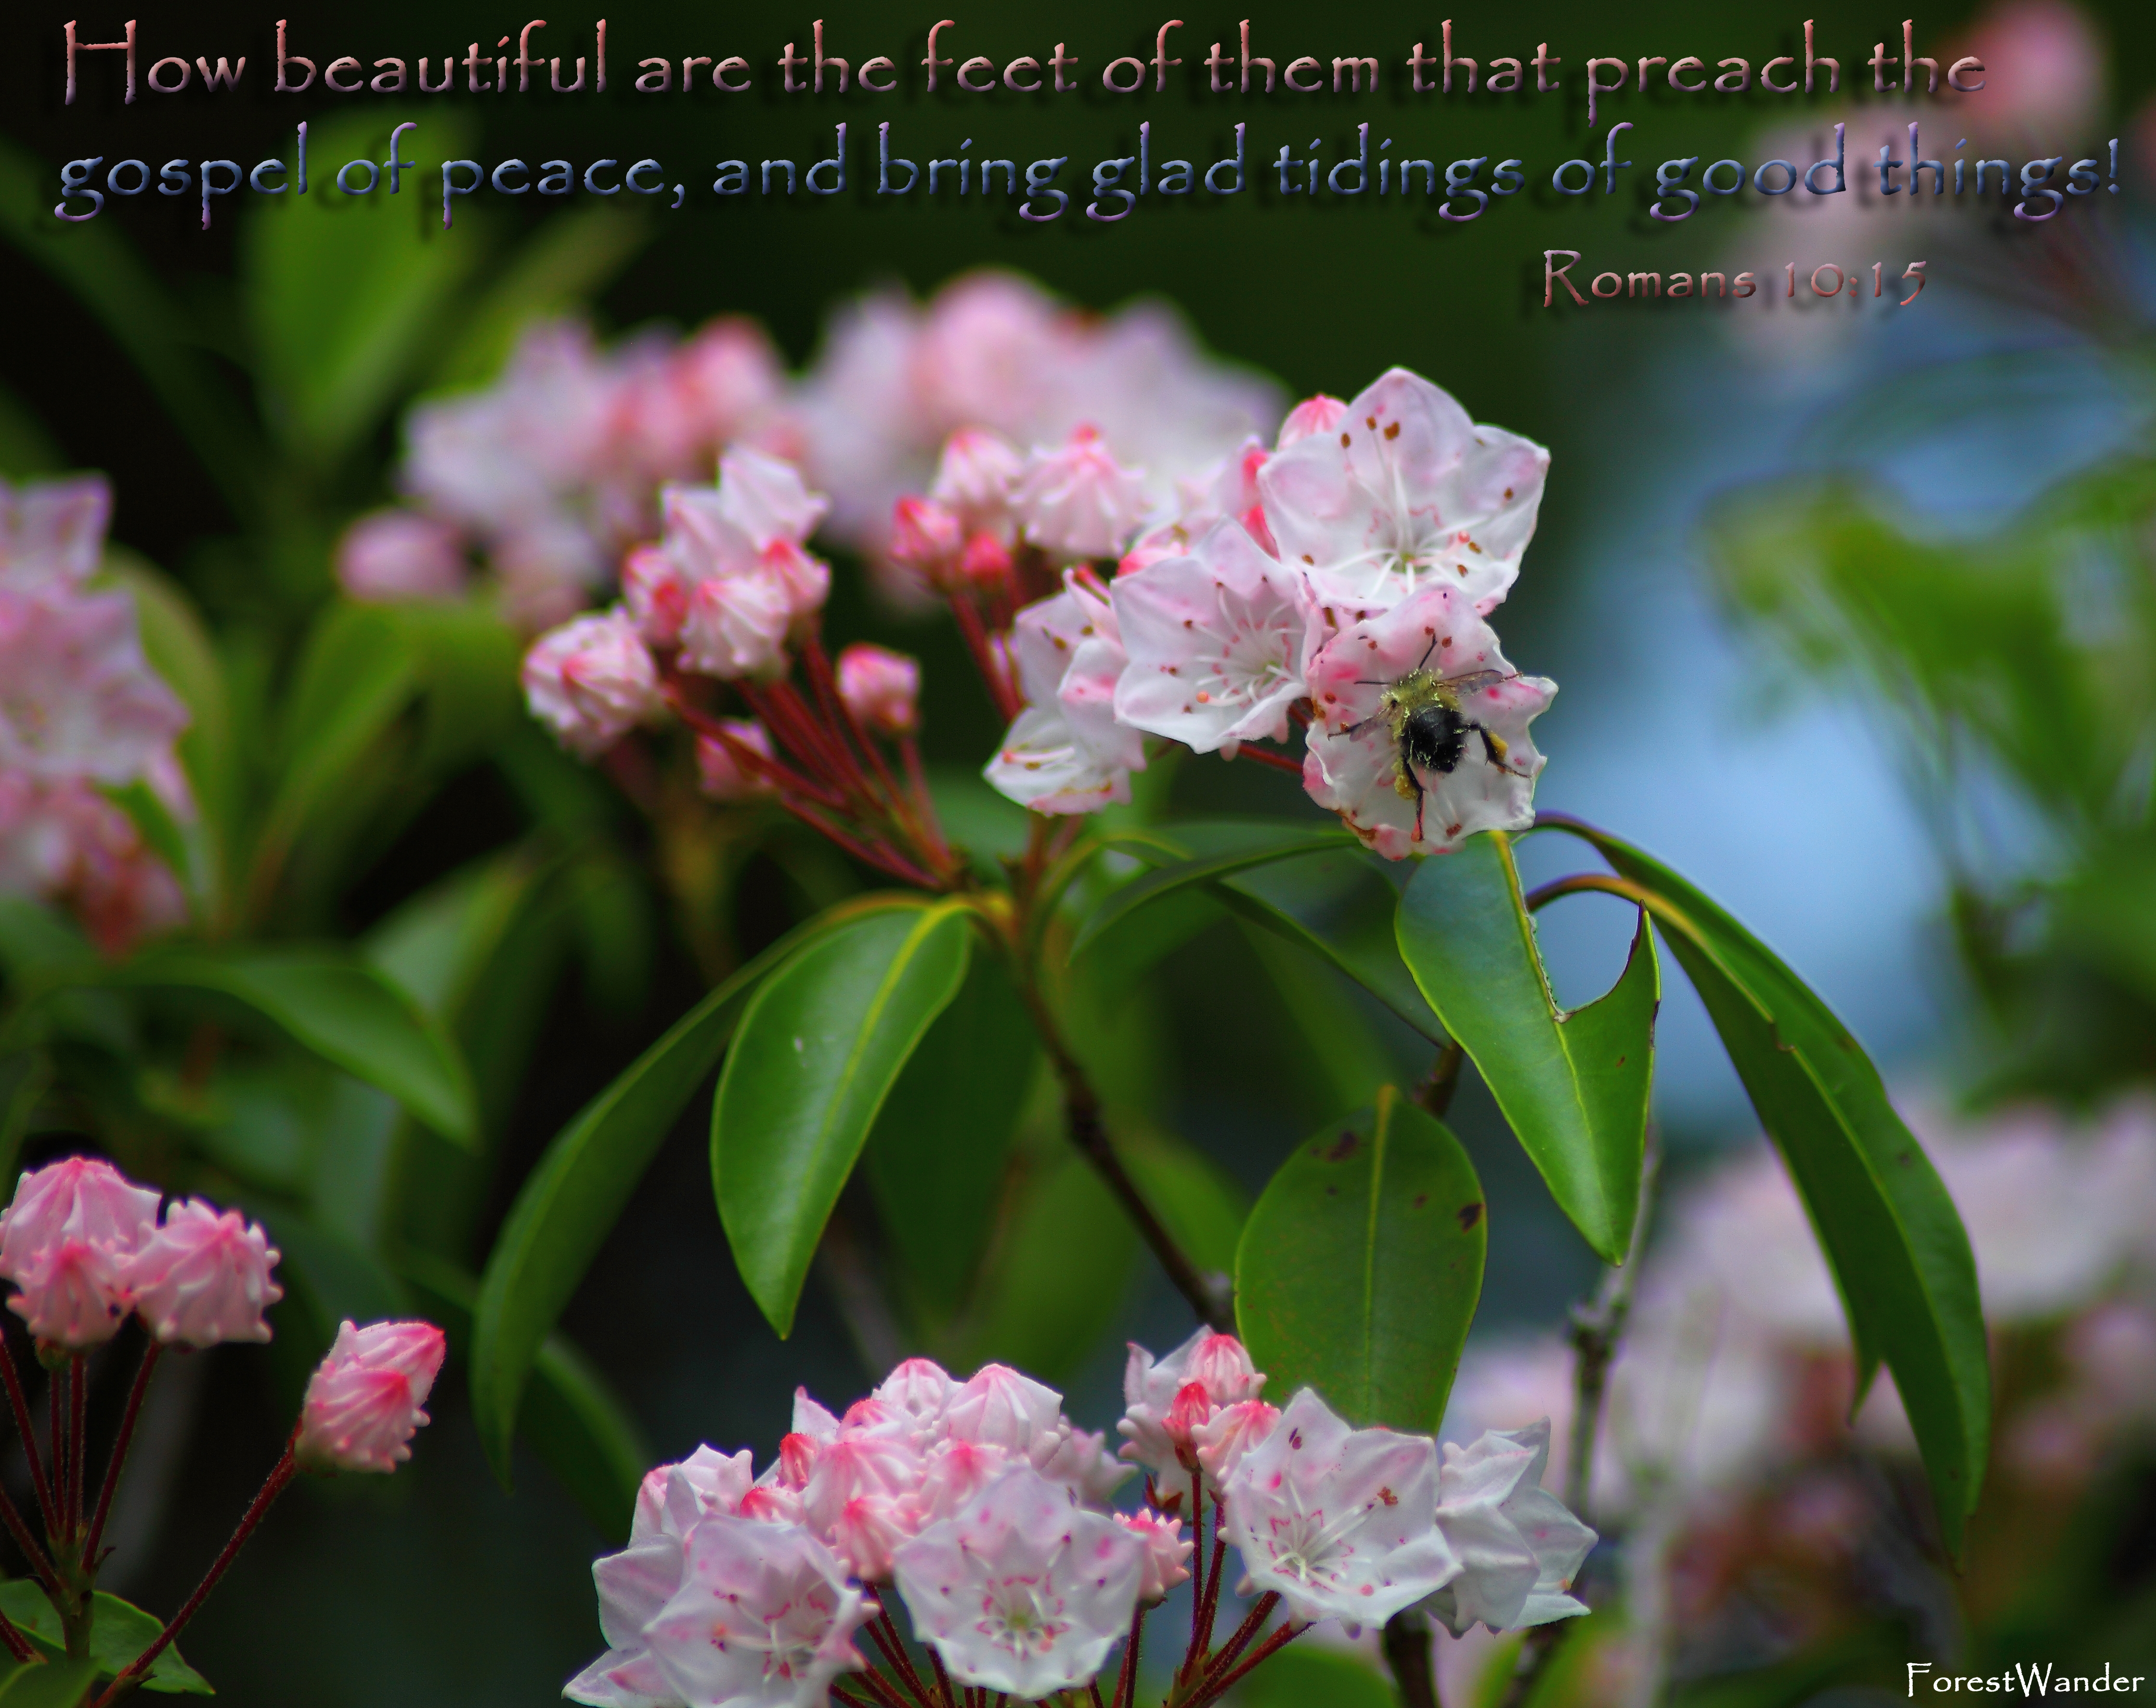 Romans 10-15 Beautiful Feet Preach Gospel Peace Bring Glad Tidings Good  Things | Free Christian Poster Pictures Bible Verse Wallpaper Scripture  Art| Free Nature Pictures by ForestWander Nature Photography